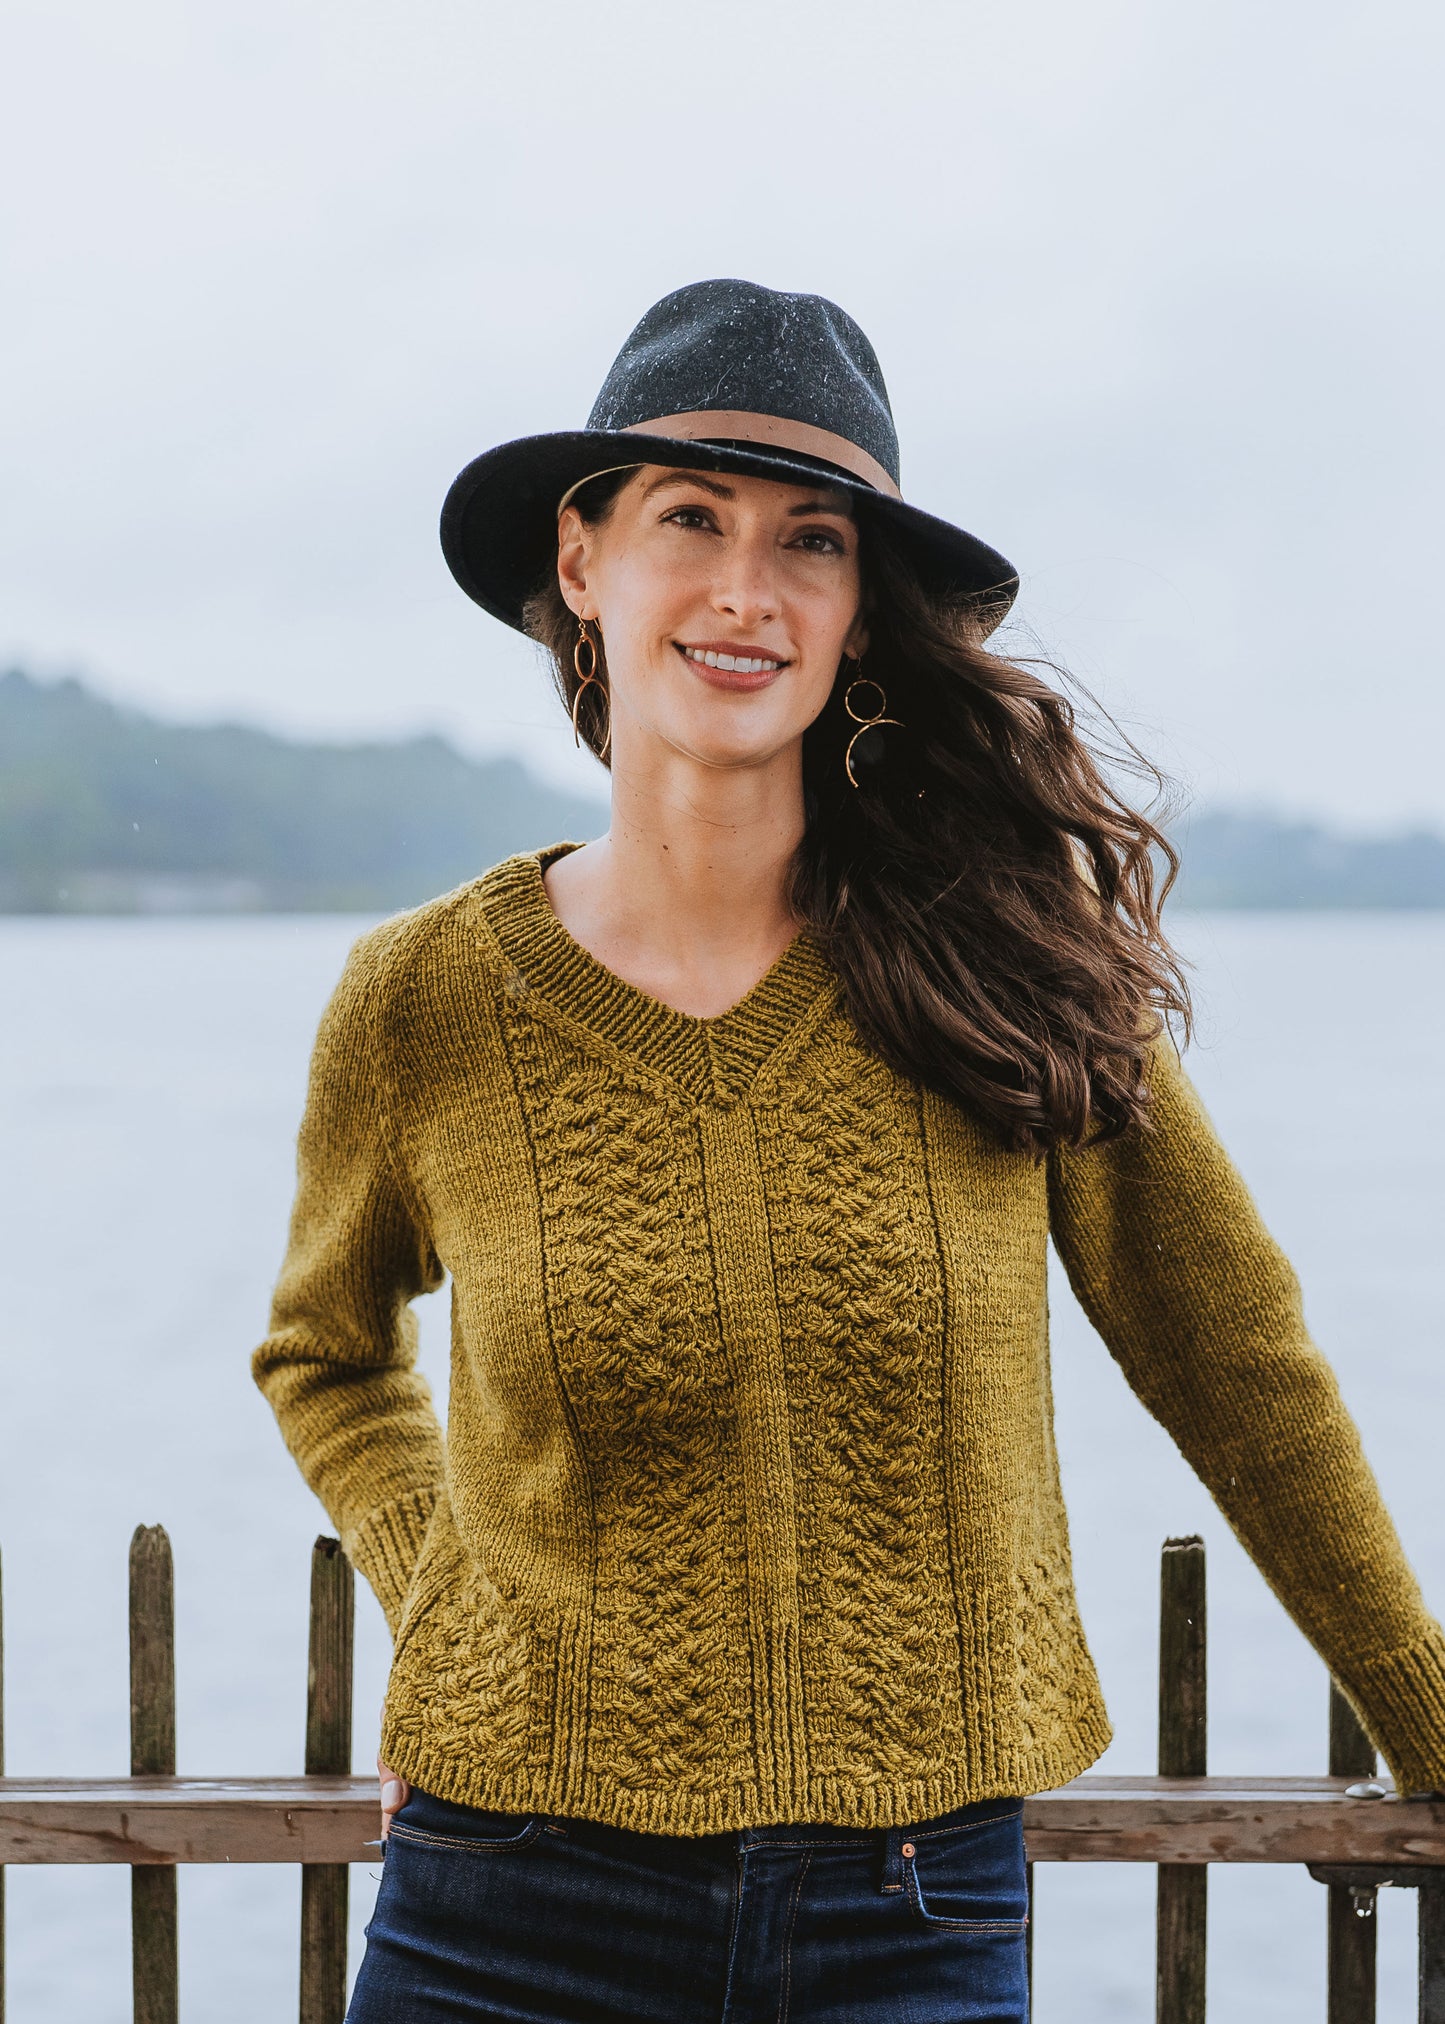 Laura stands outside on front of a body of water, smiling at the camera. Her handmade sweater is knit up with golden colored yarn, with cable plait details down the front.